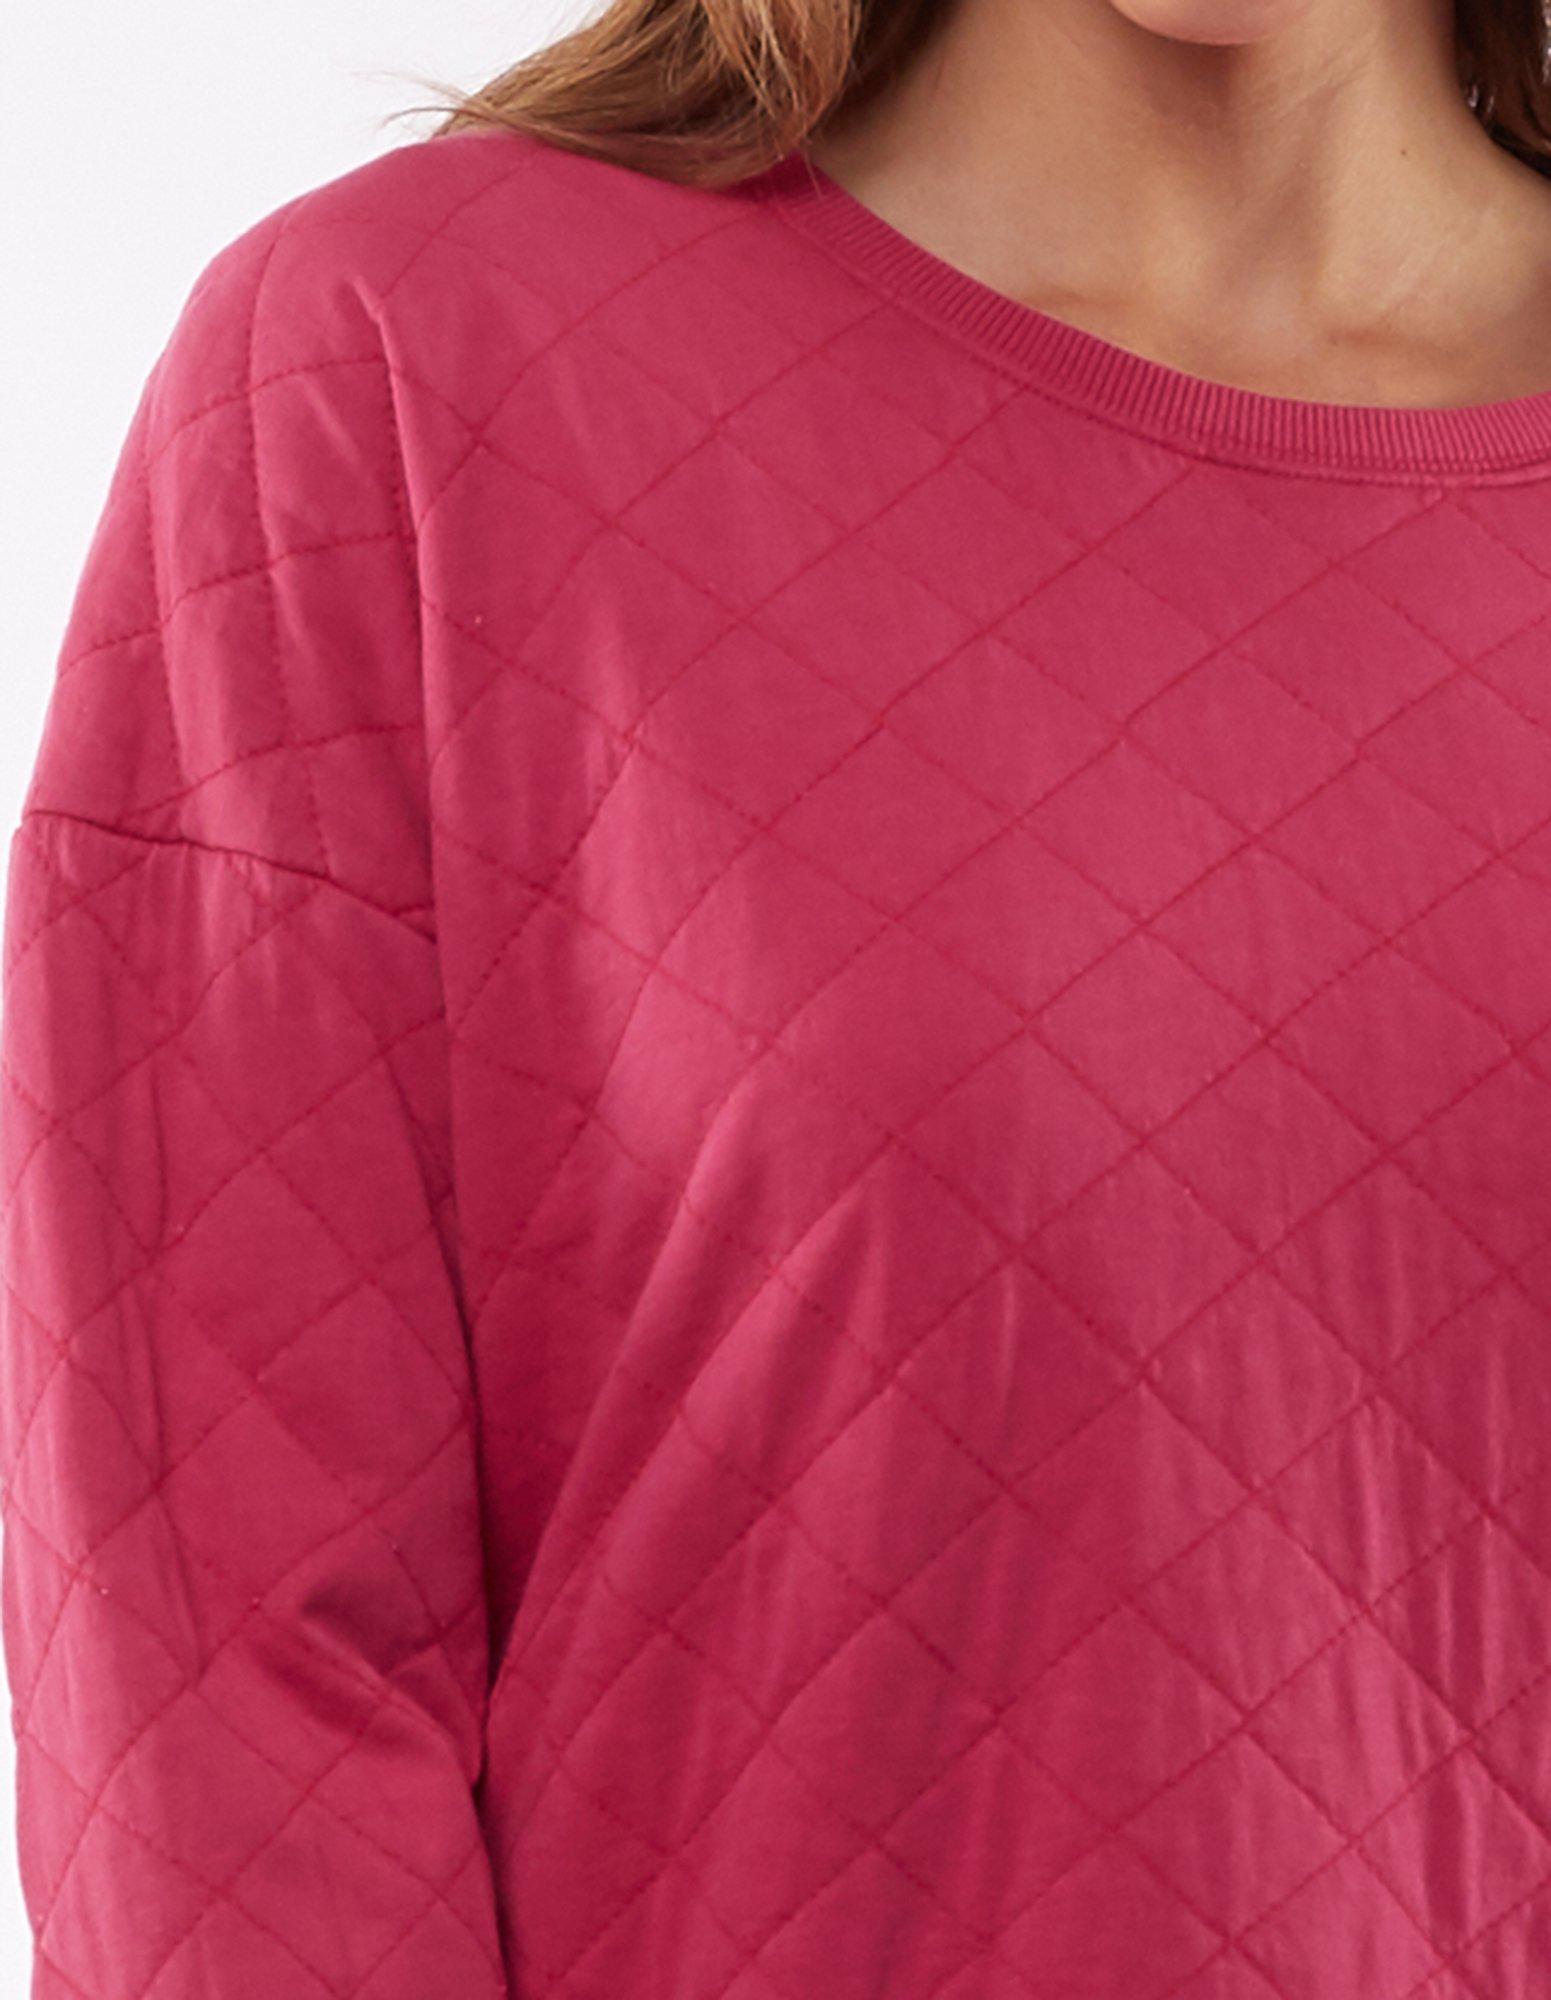 Becky Quilted Crew - Raspberry Sorbet - Elm Lifestyle - FUDGE Gifts Home Lifestyle